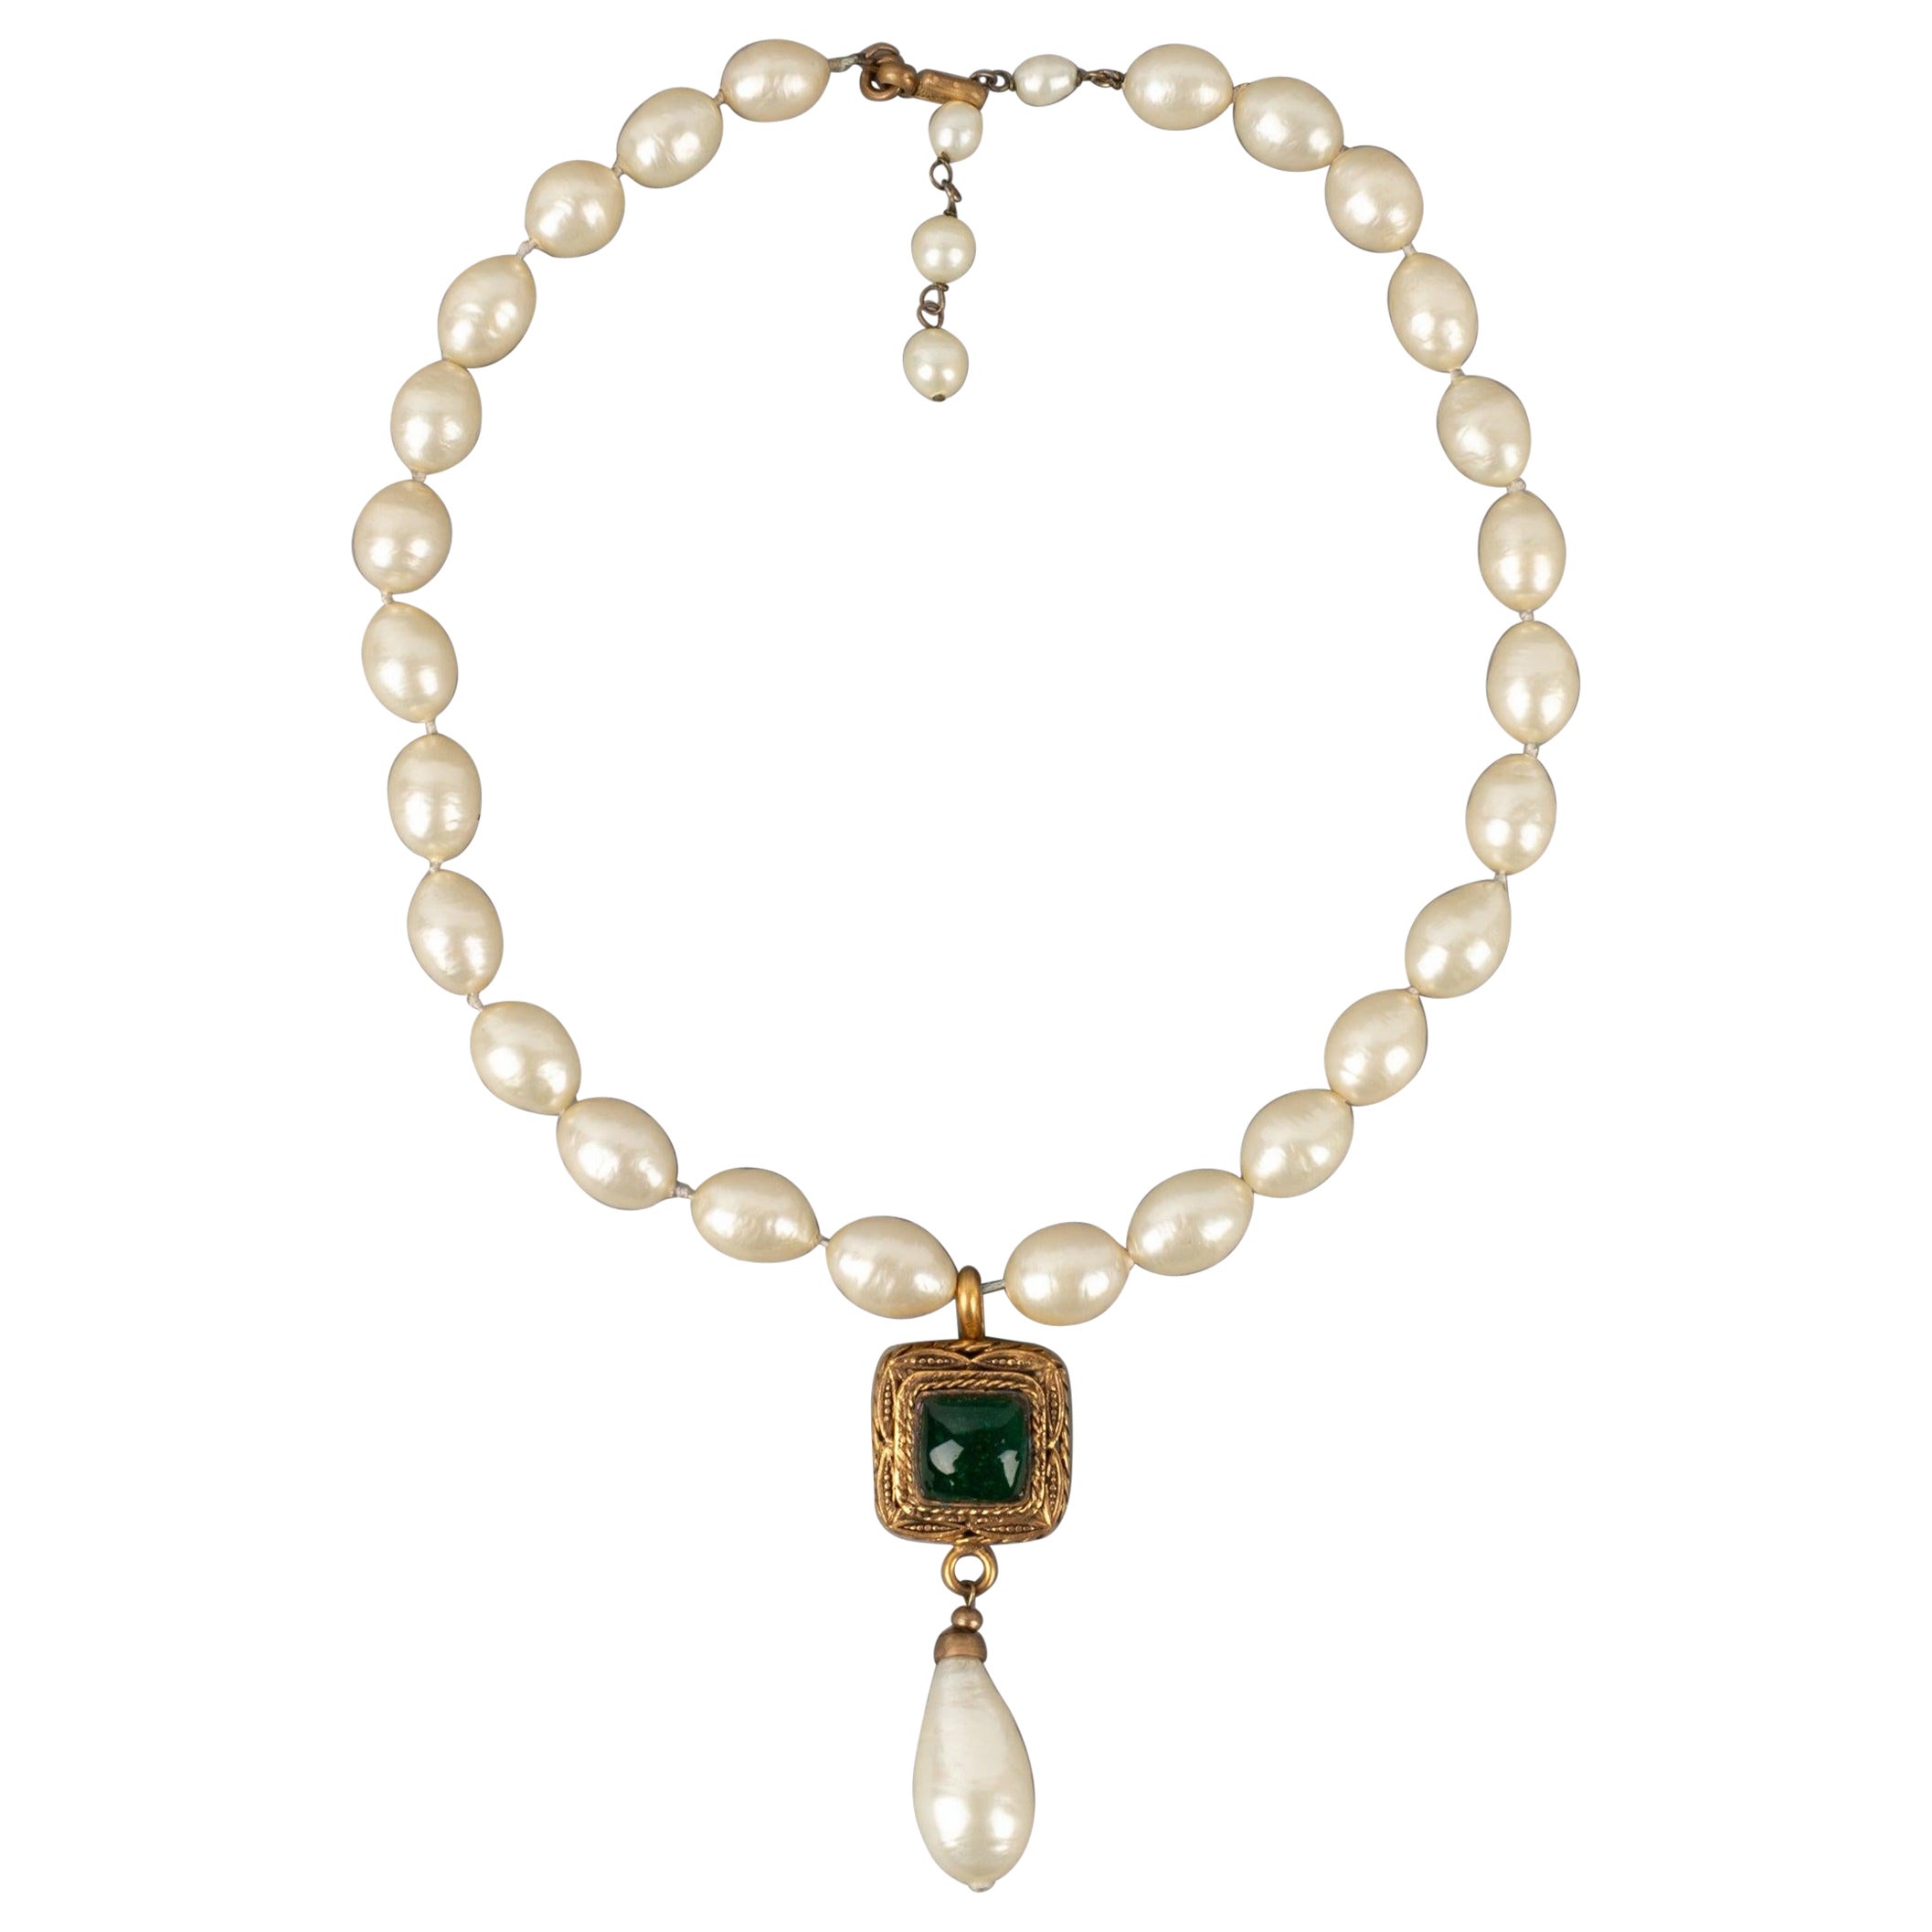 Chanel Costume Pearl Necklace with a Golden Metal Pendant, 1983 For Sale